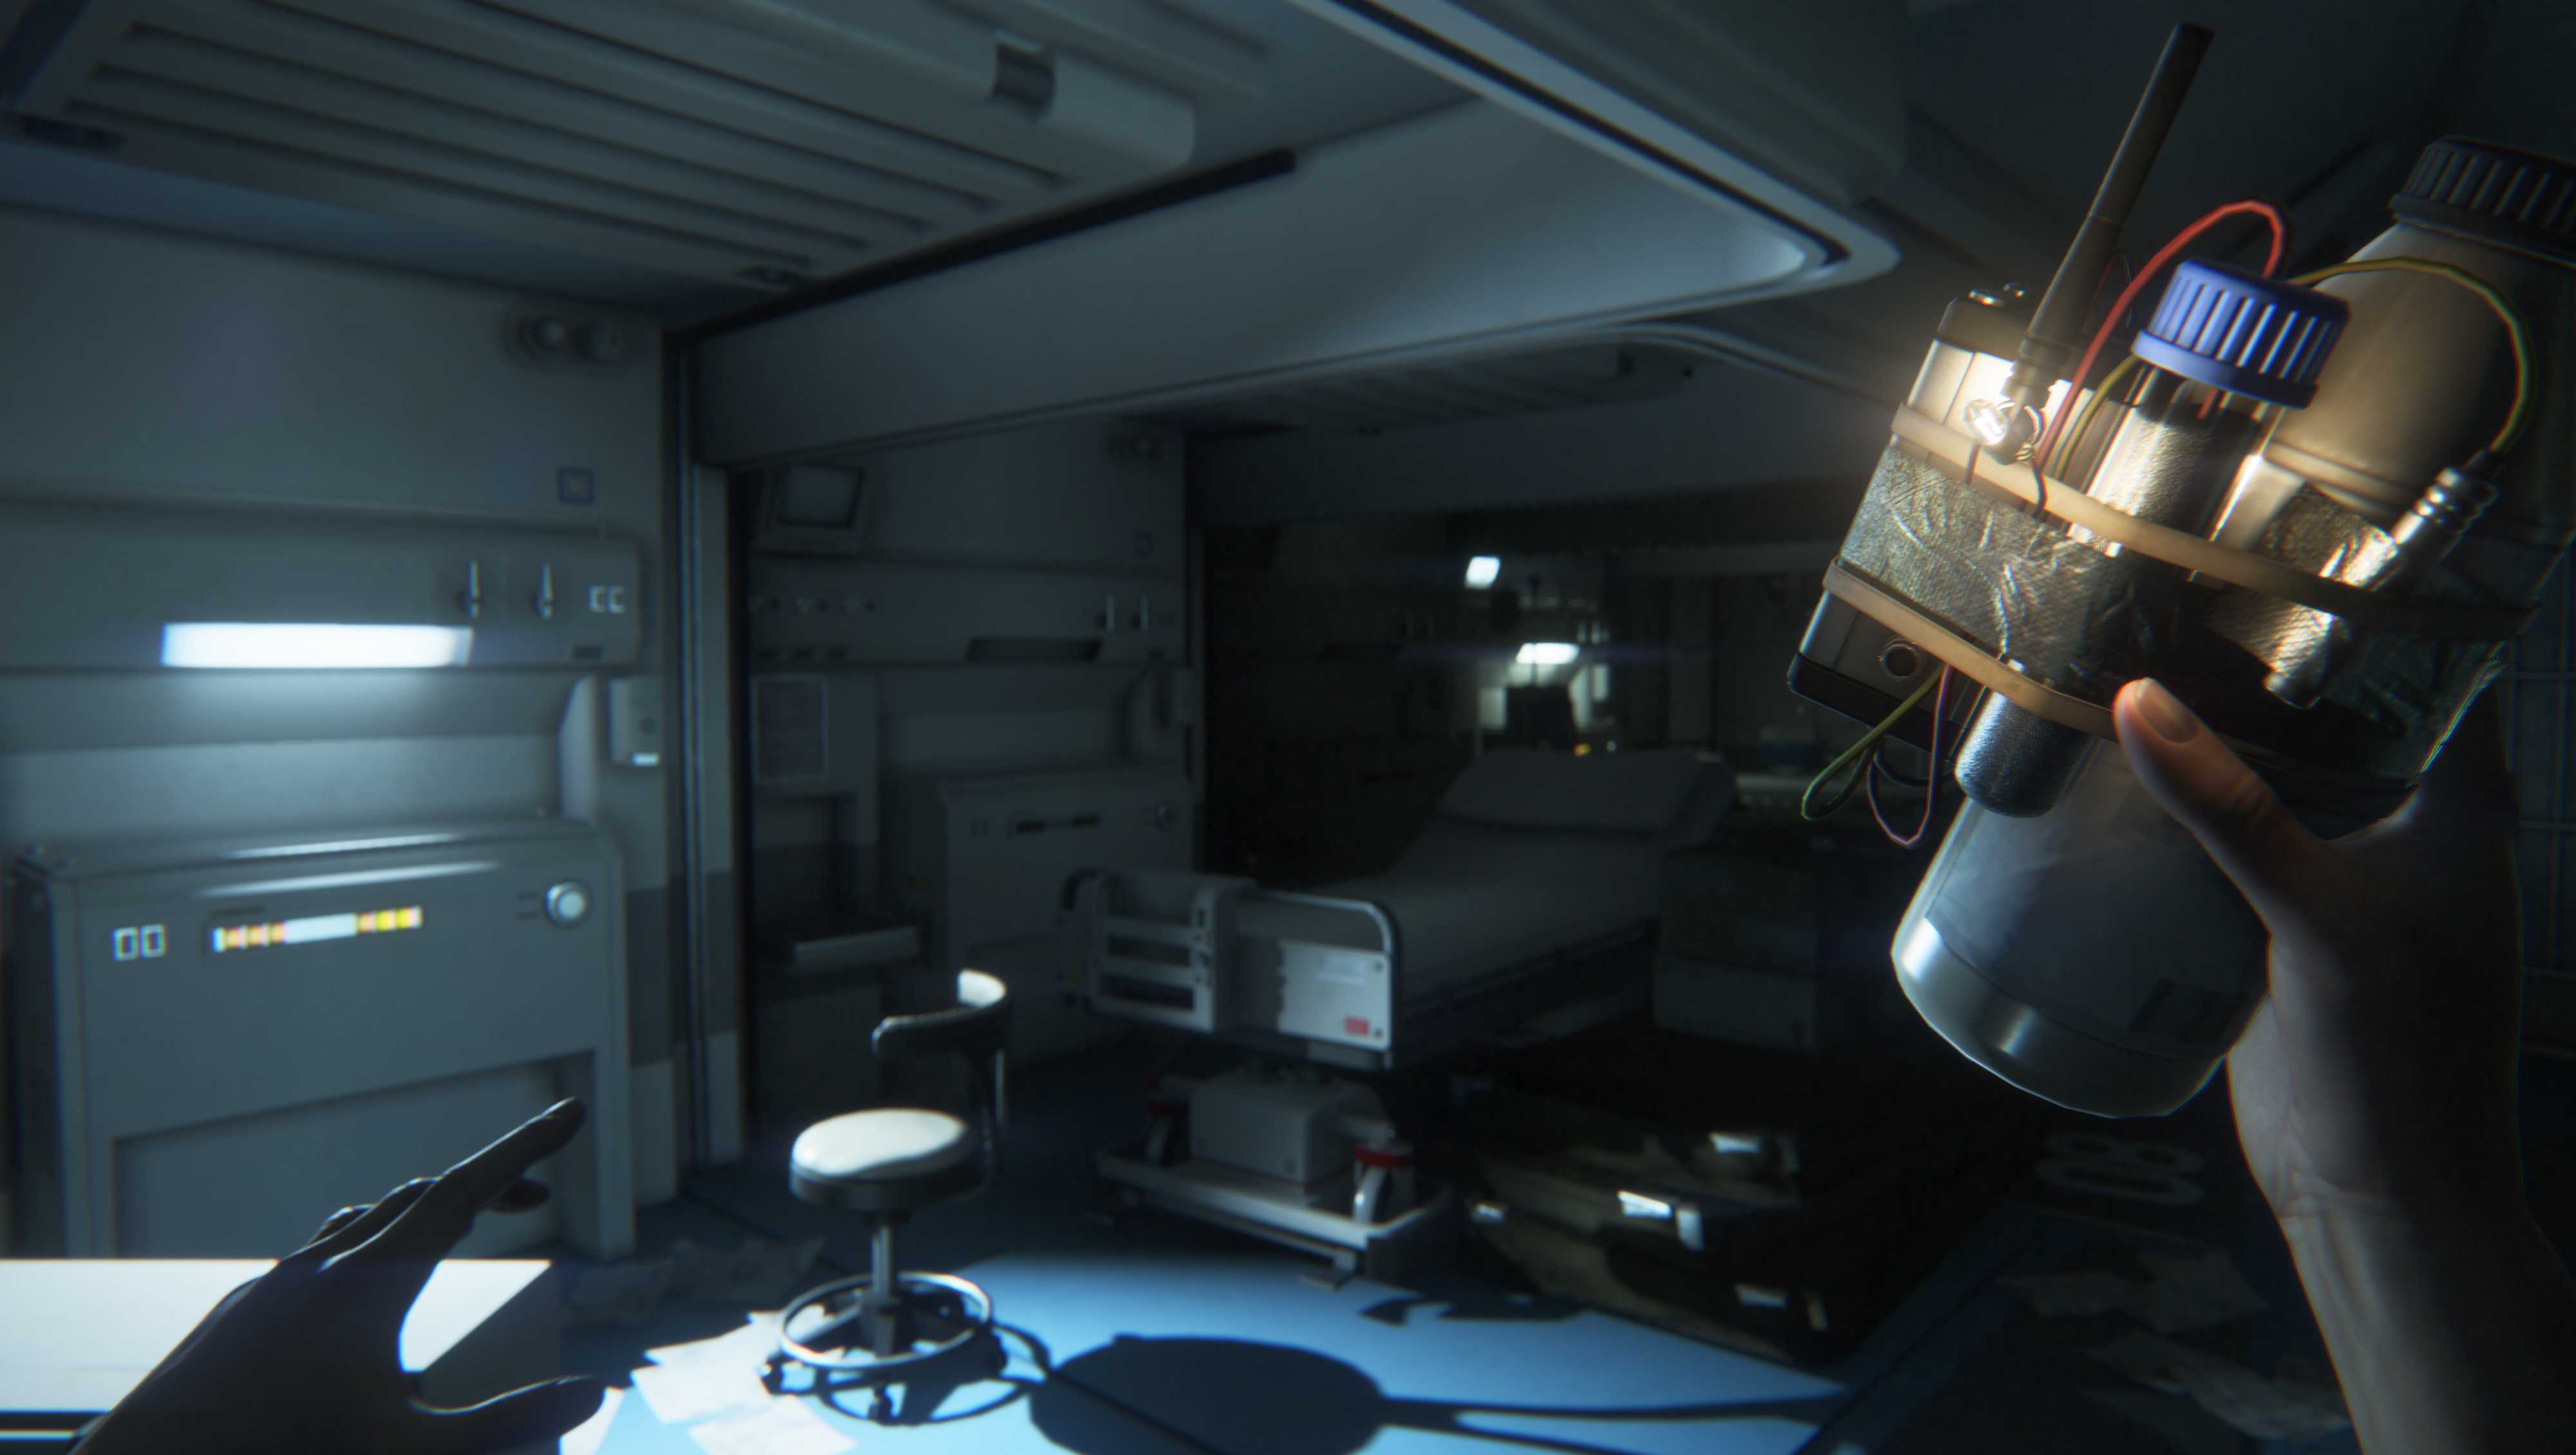 Alien: isolation complete walkthrough and game guide